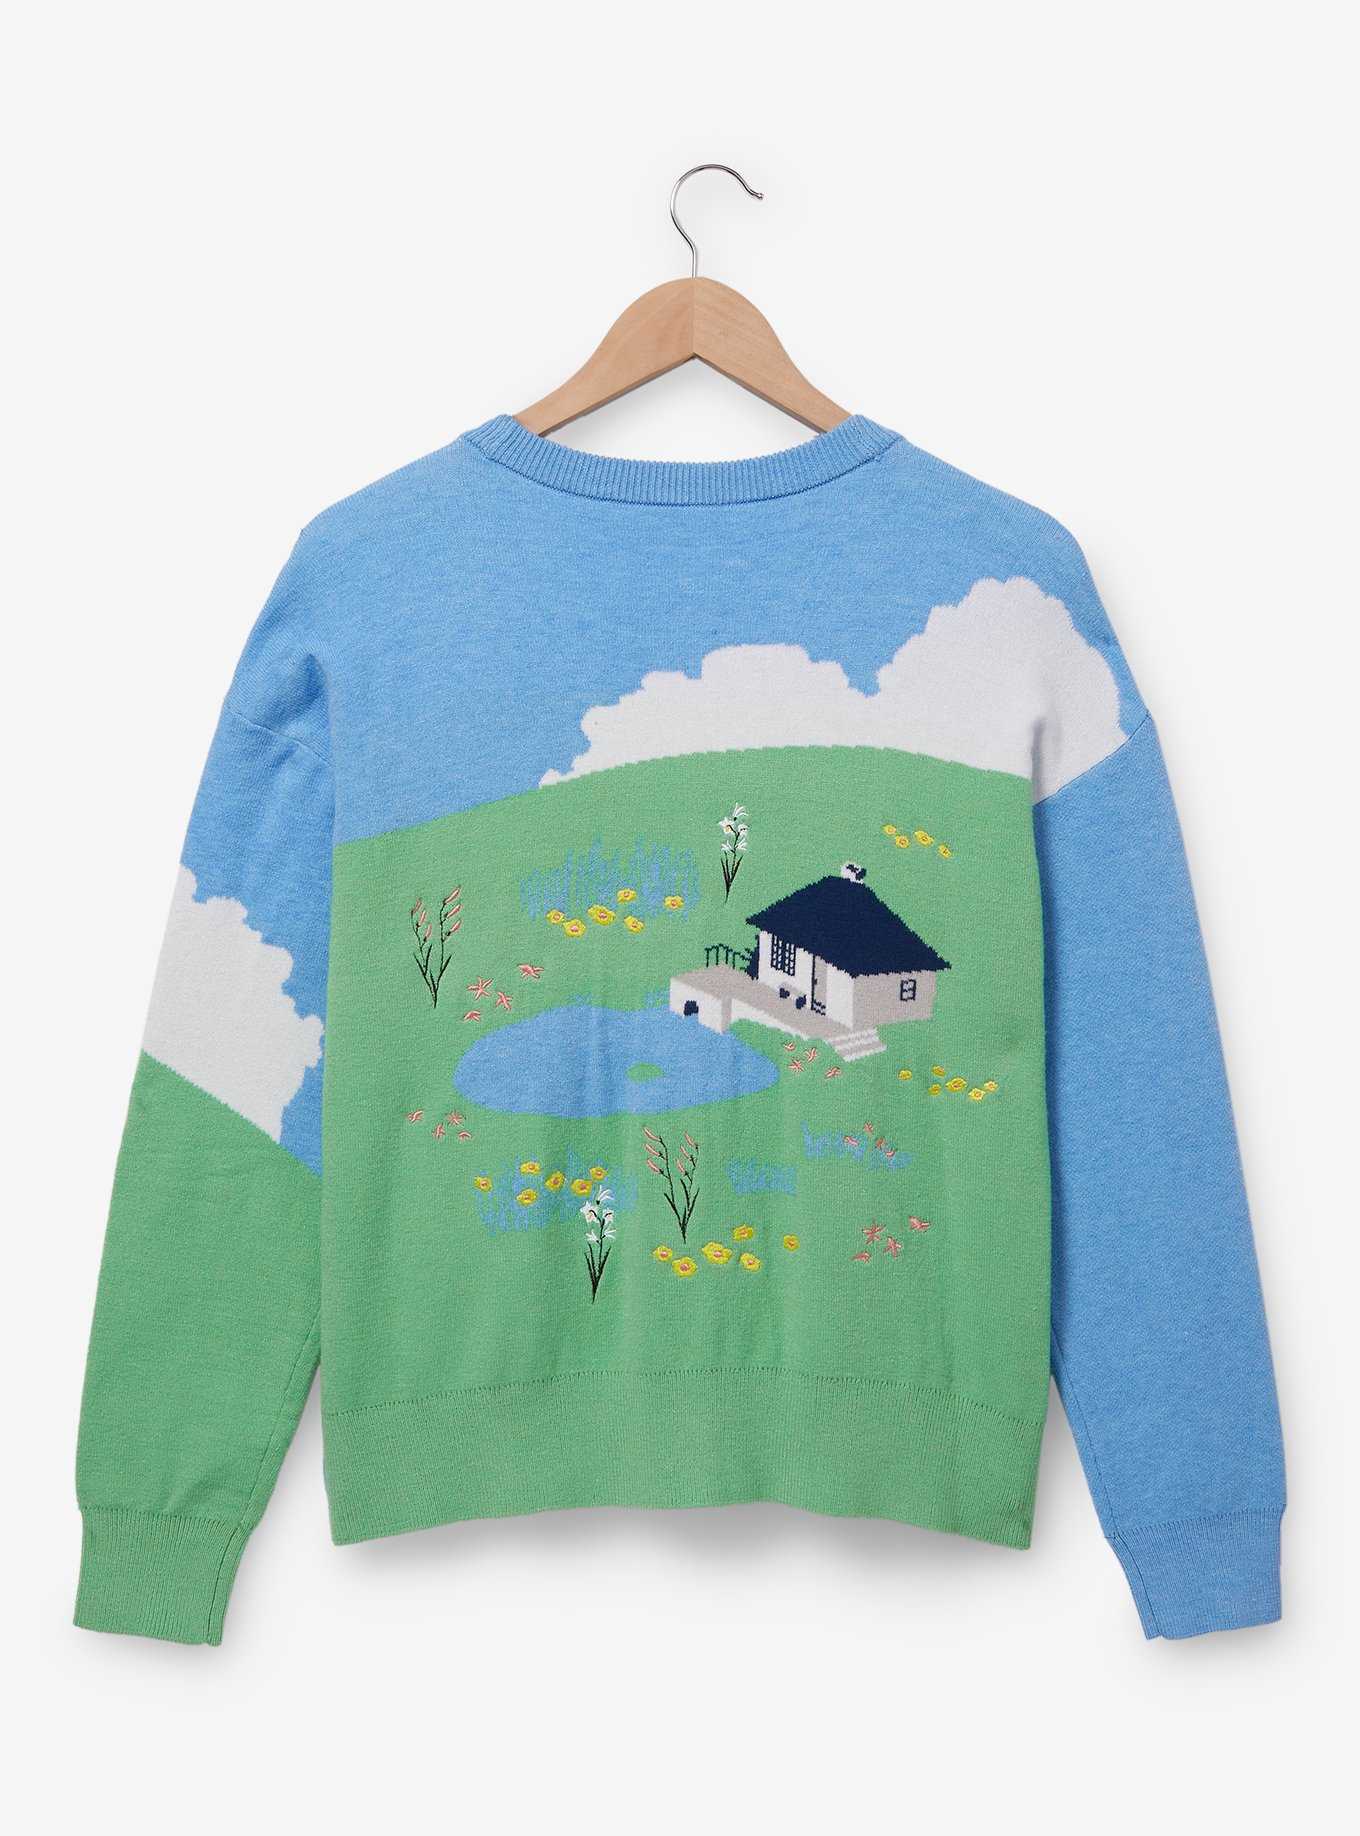 Studio Ghibli Howl's Moving Castle Sophie & Howl Women's Cardigan - BoxLunch Exclusive, , hi-res